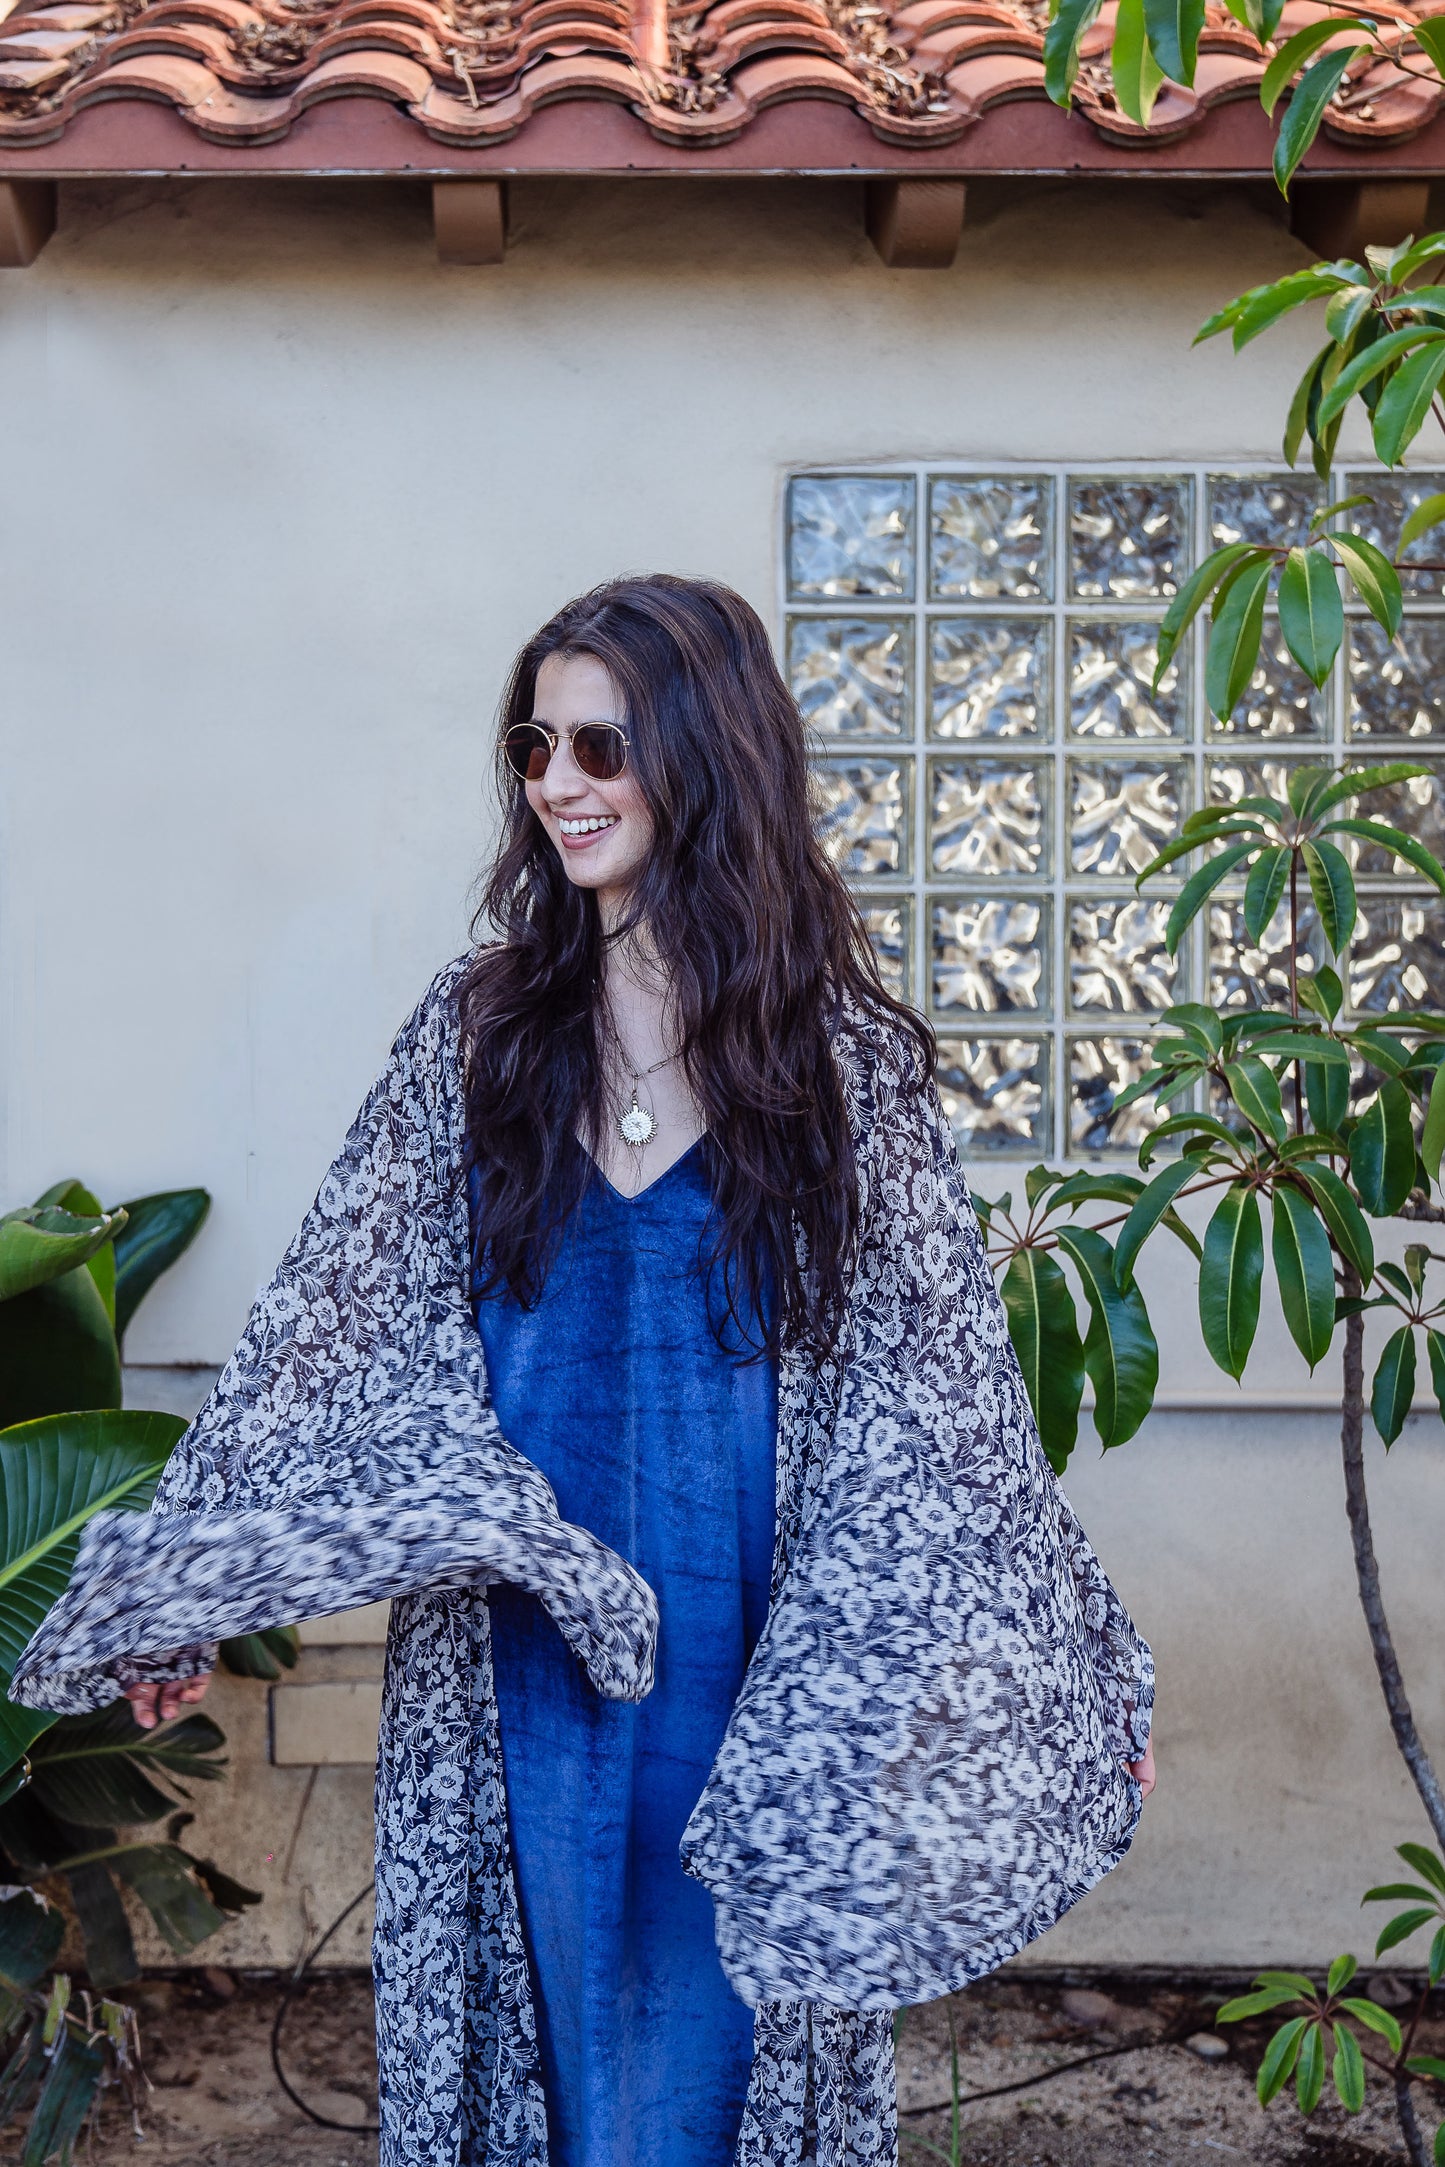 A white and dark blue floral patterned kimono robe featuring long, wide, rectangular sleeves, a full-length cut, deep pockets, and a matching tie belt for an optional cinched waist.